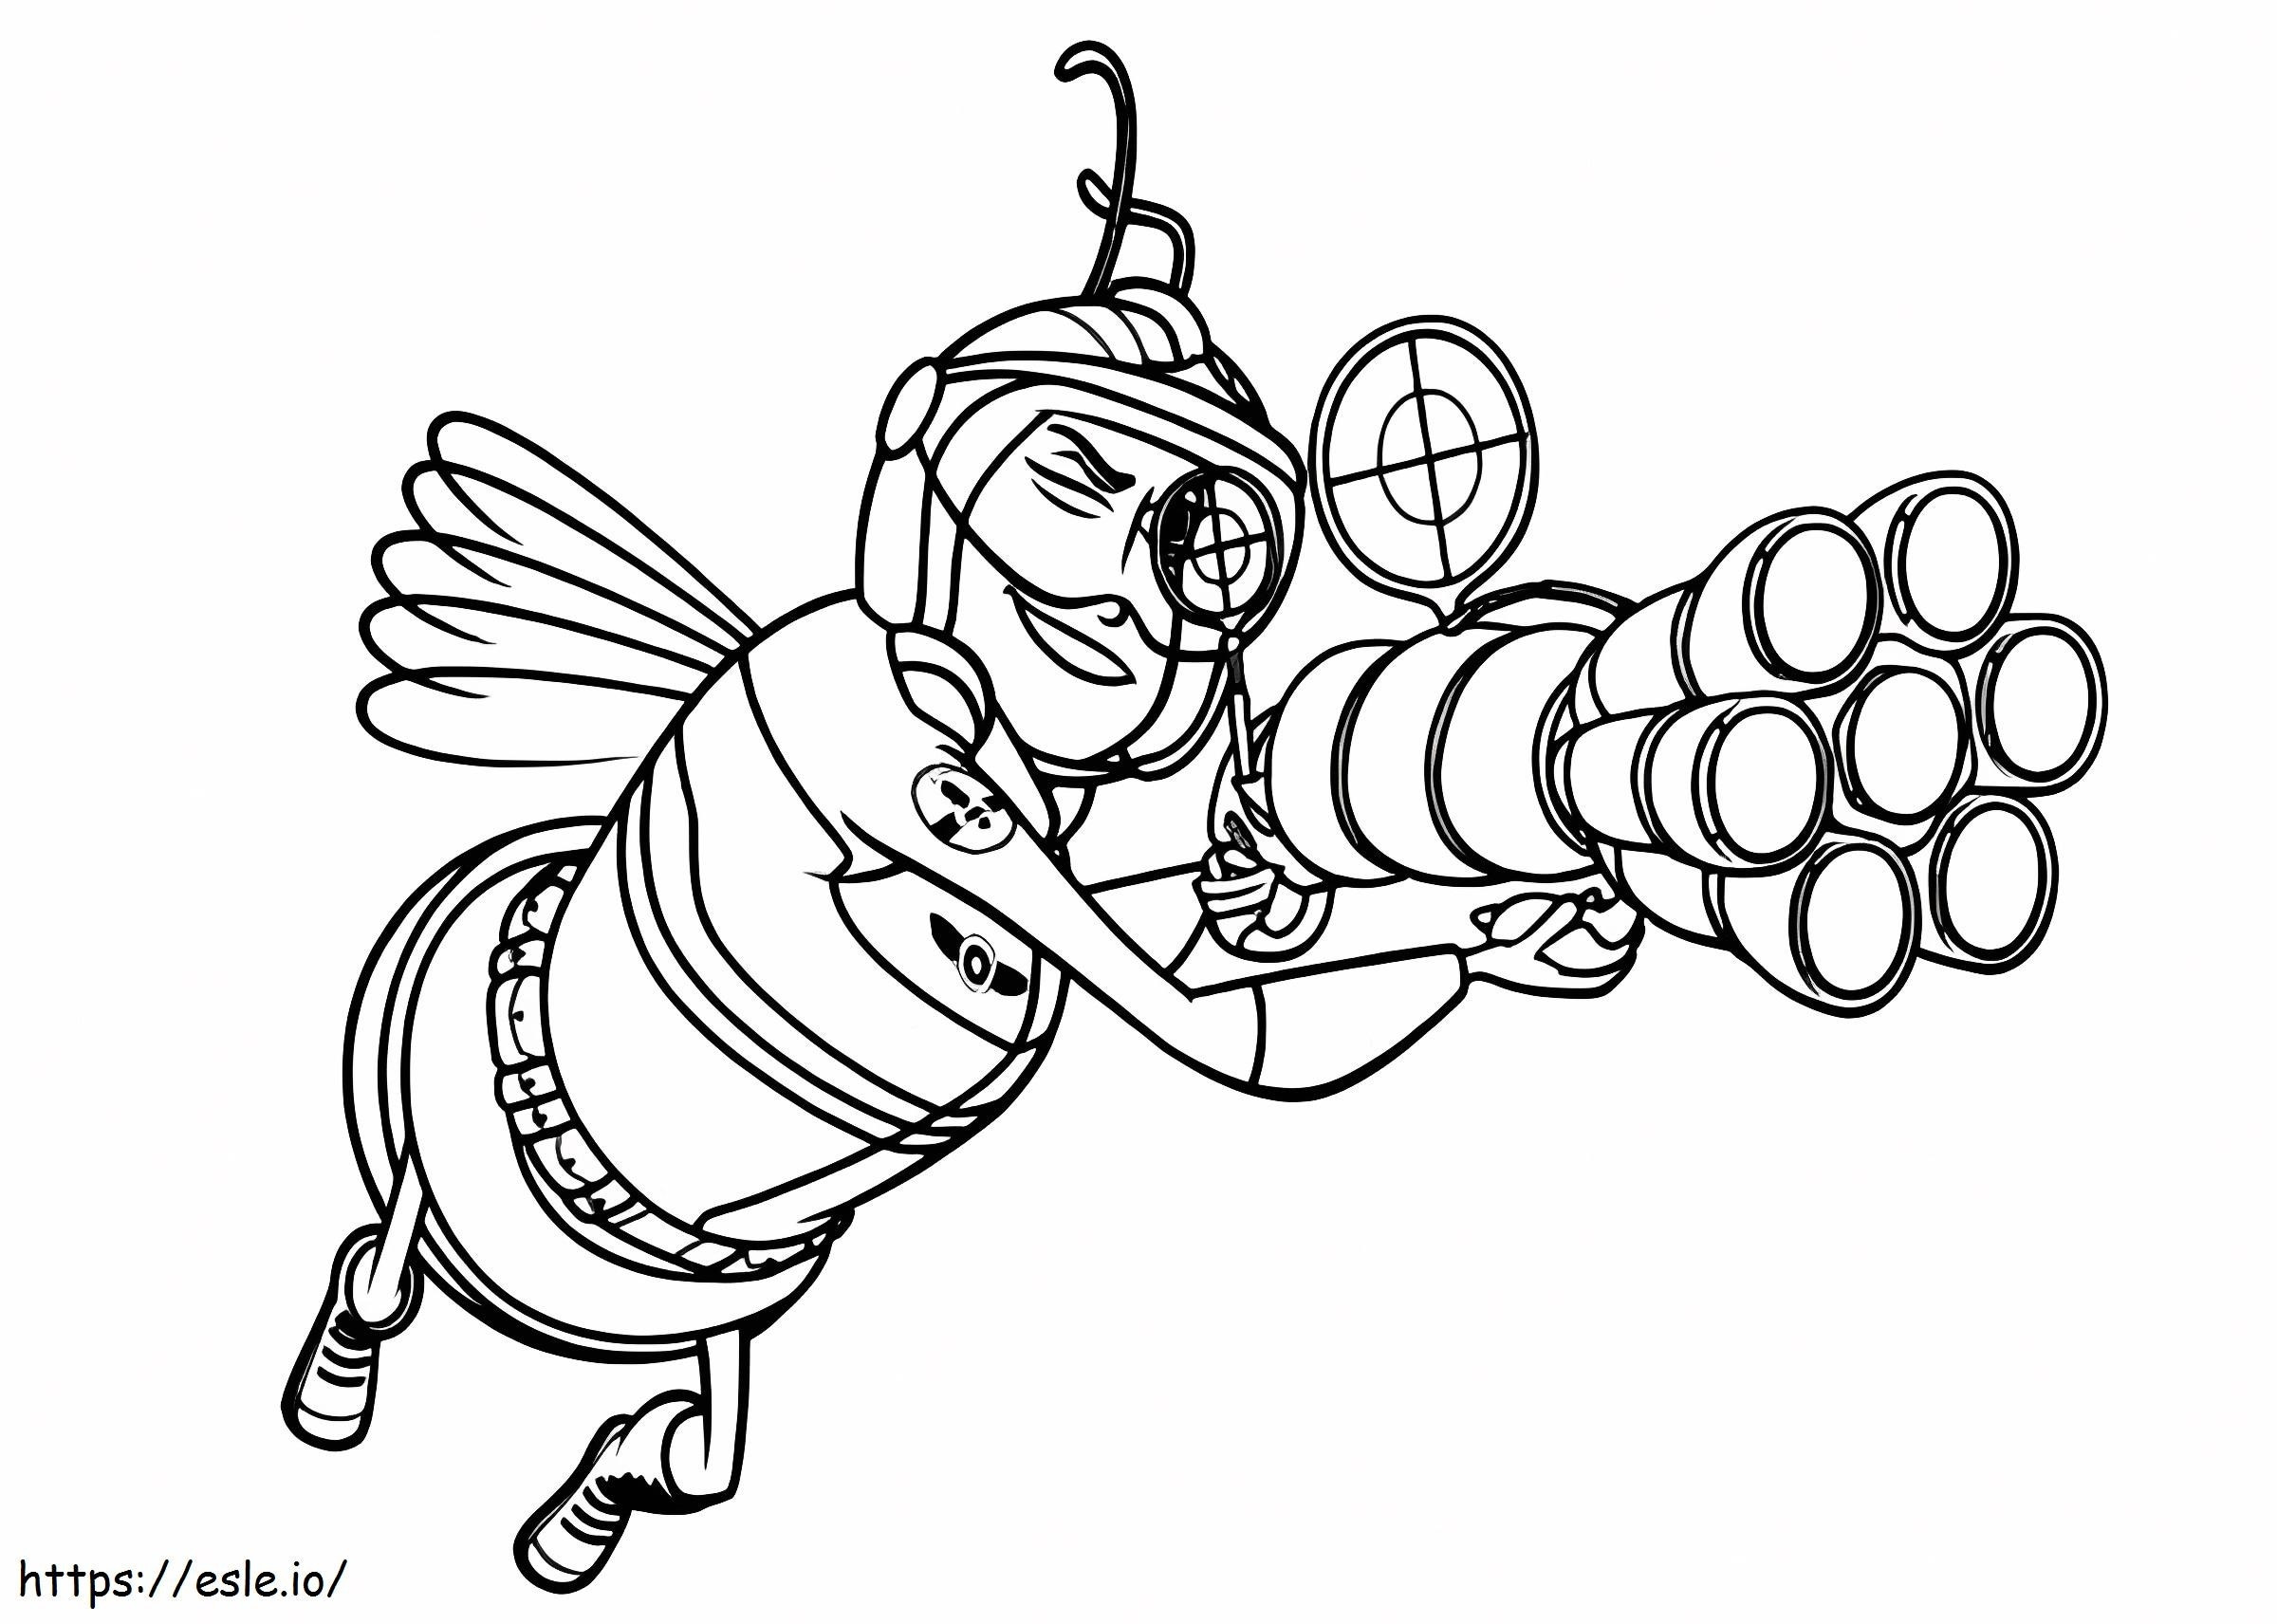 Bee Soldier A4 E1600338650398 coloring page